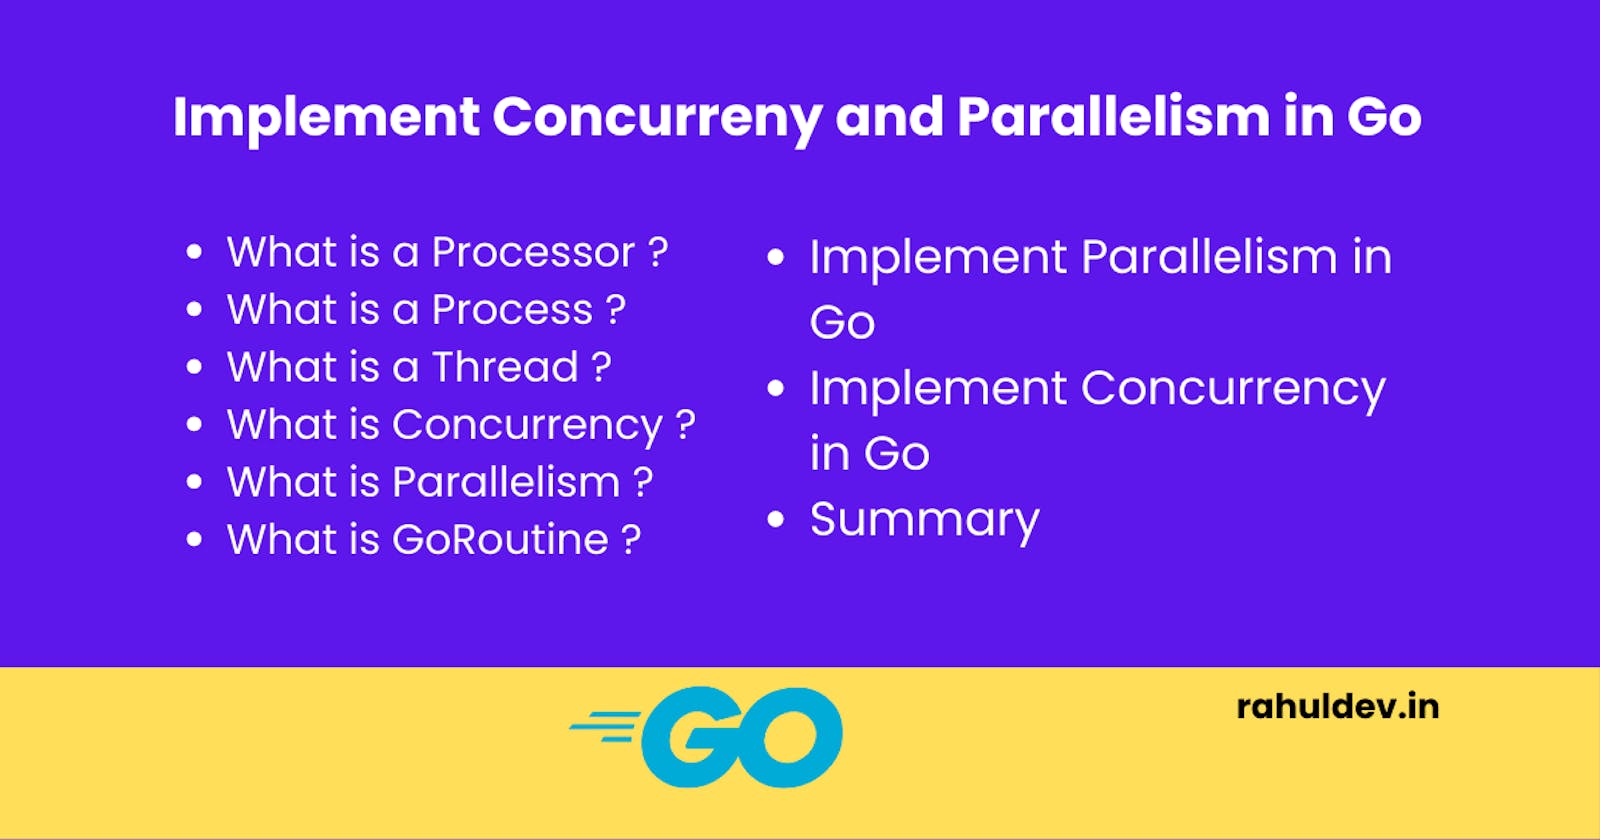 How to implement Concurrency and Parallelism in Go? 🔥